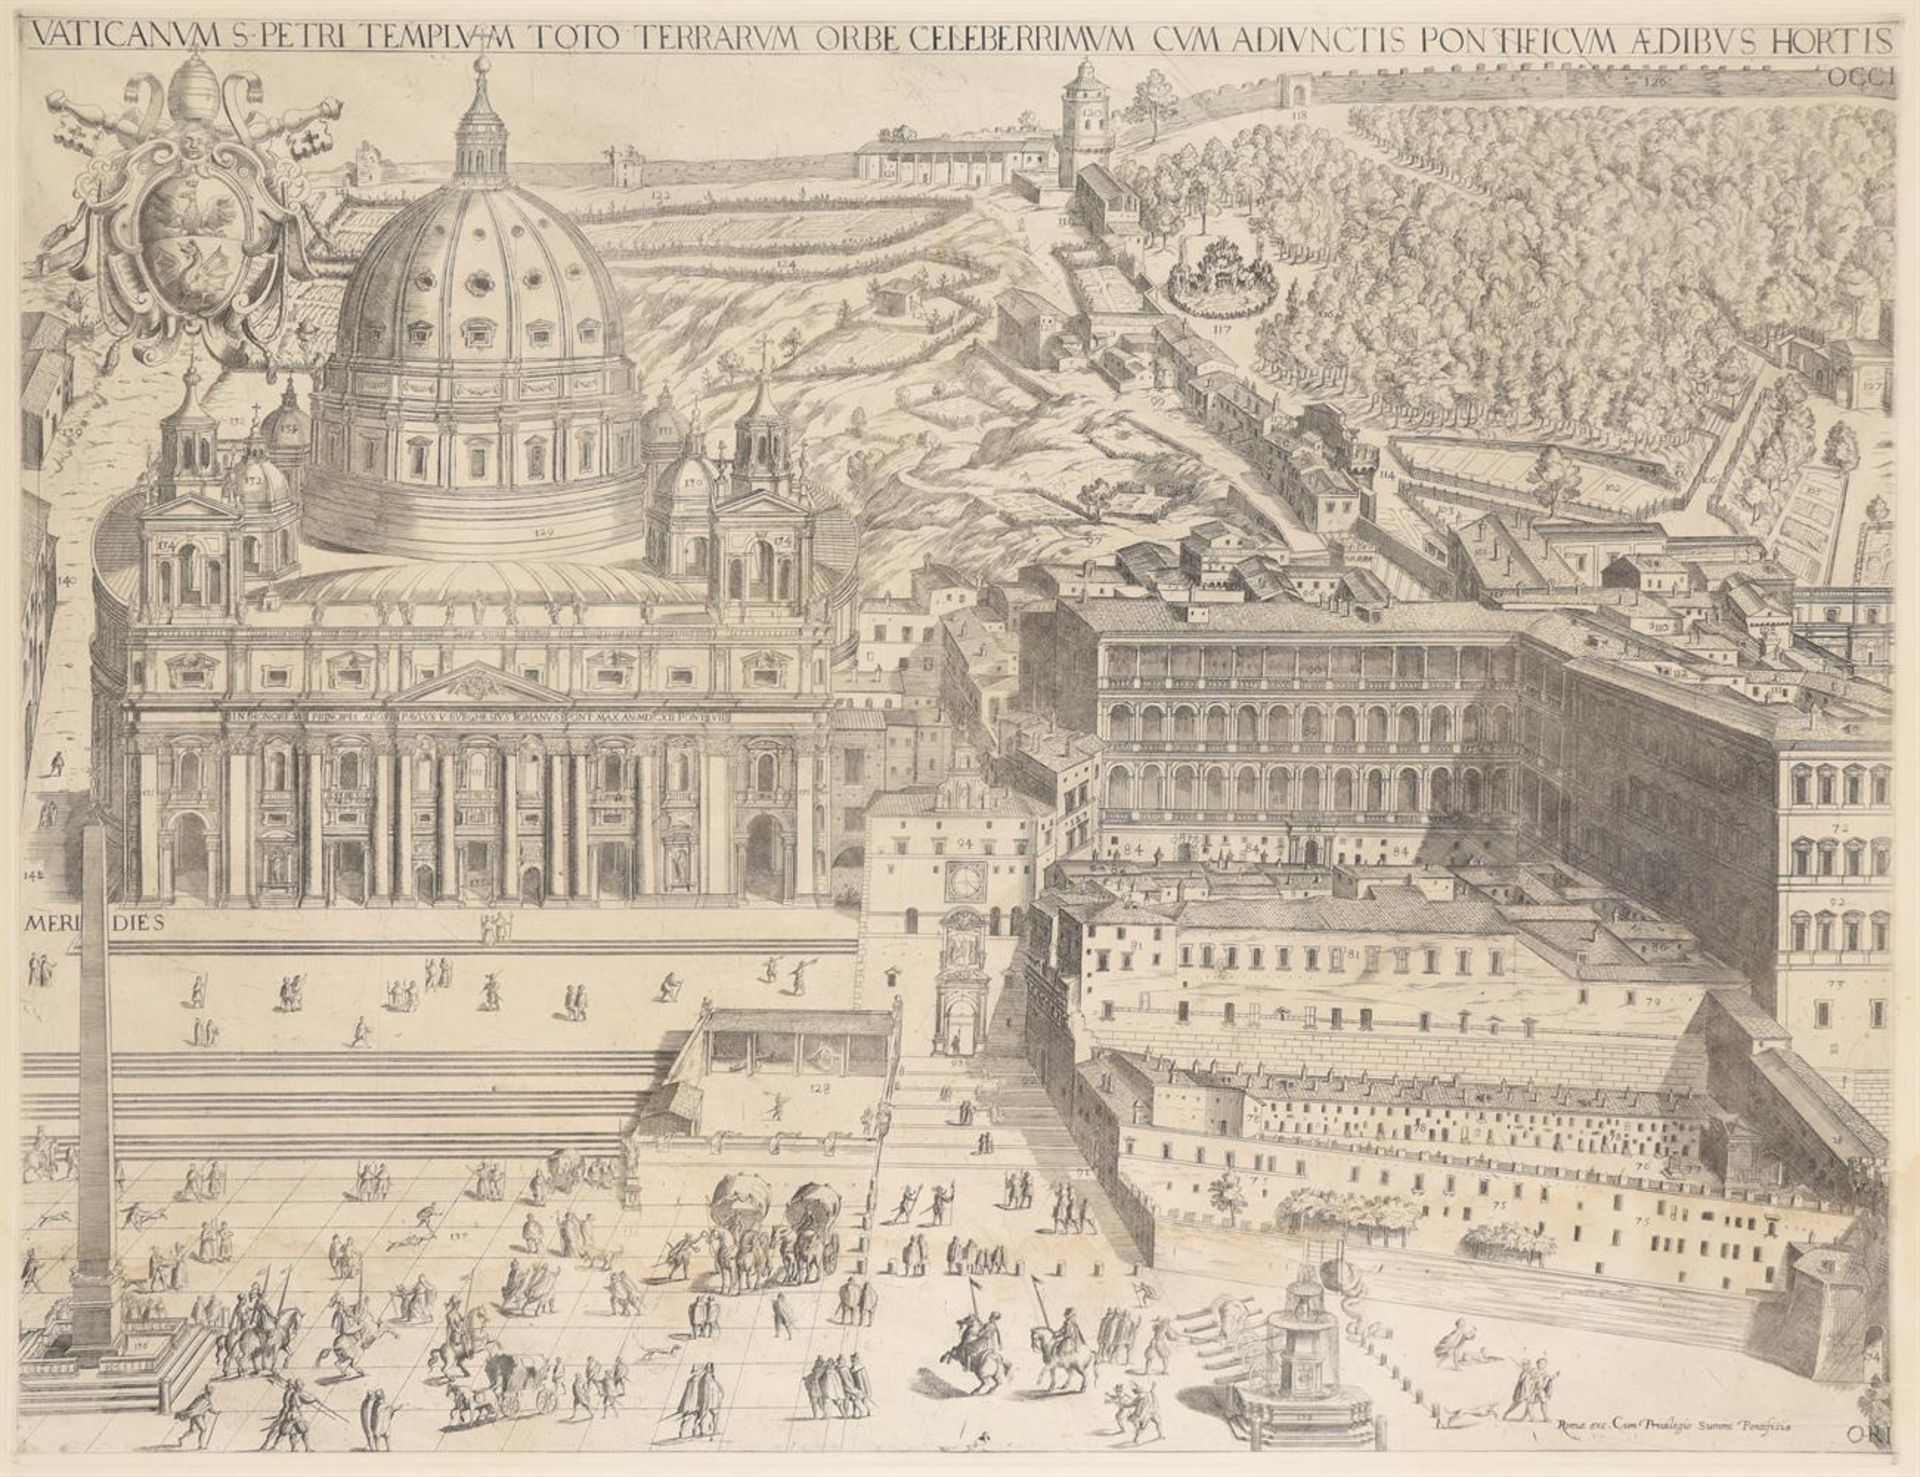 A TWO PART CITY PLAN OF ROME AFTER GIOVANNI MAGGI AND GIACOMO MASCARDI